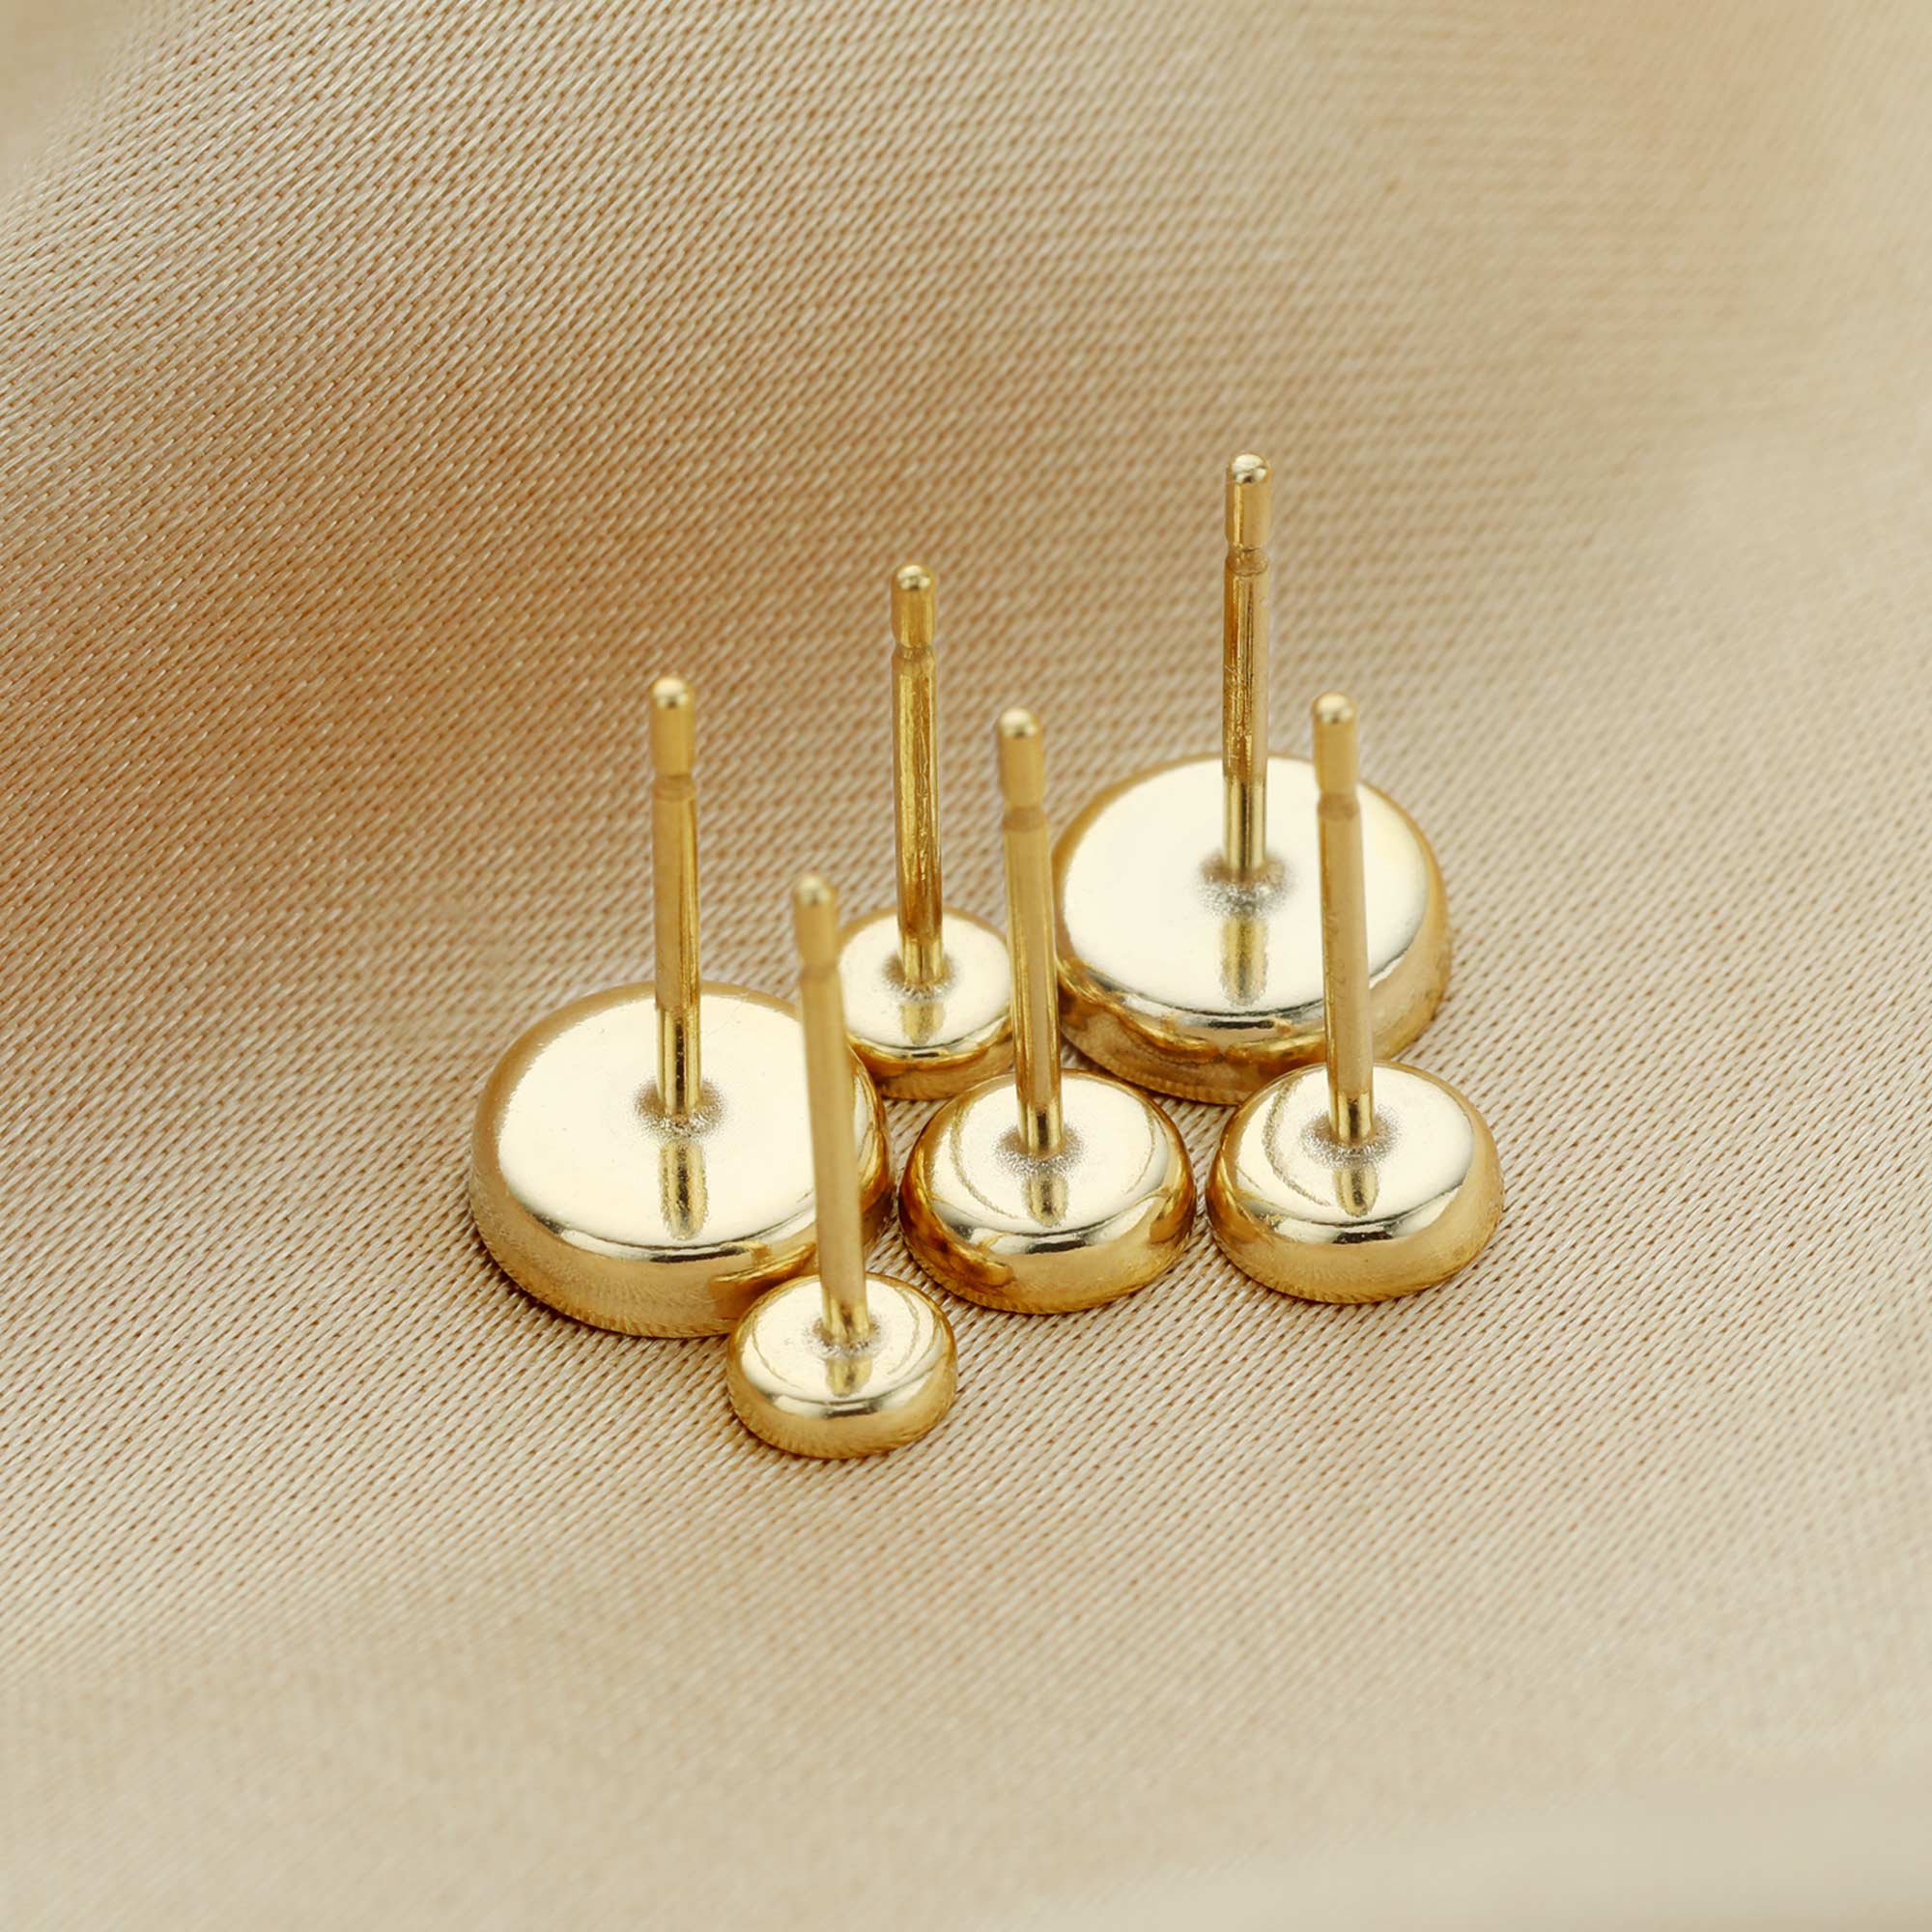 3-6MM Round Breast Milk Resin Cup Studs Earrings Settings,14K Gold Filled Studs Earrings Bezel,DIY Jewelry Supplies 1706100 - Click Image to Close